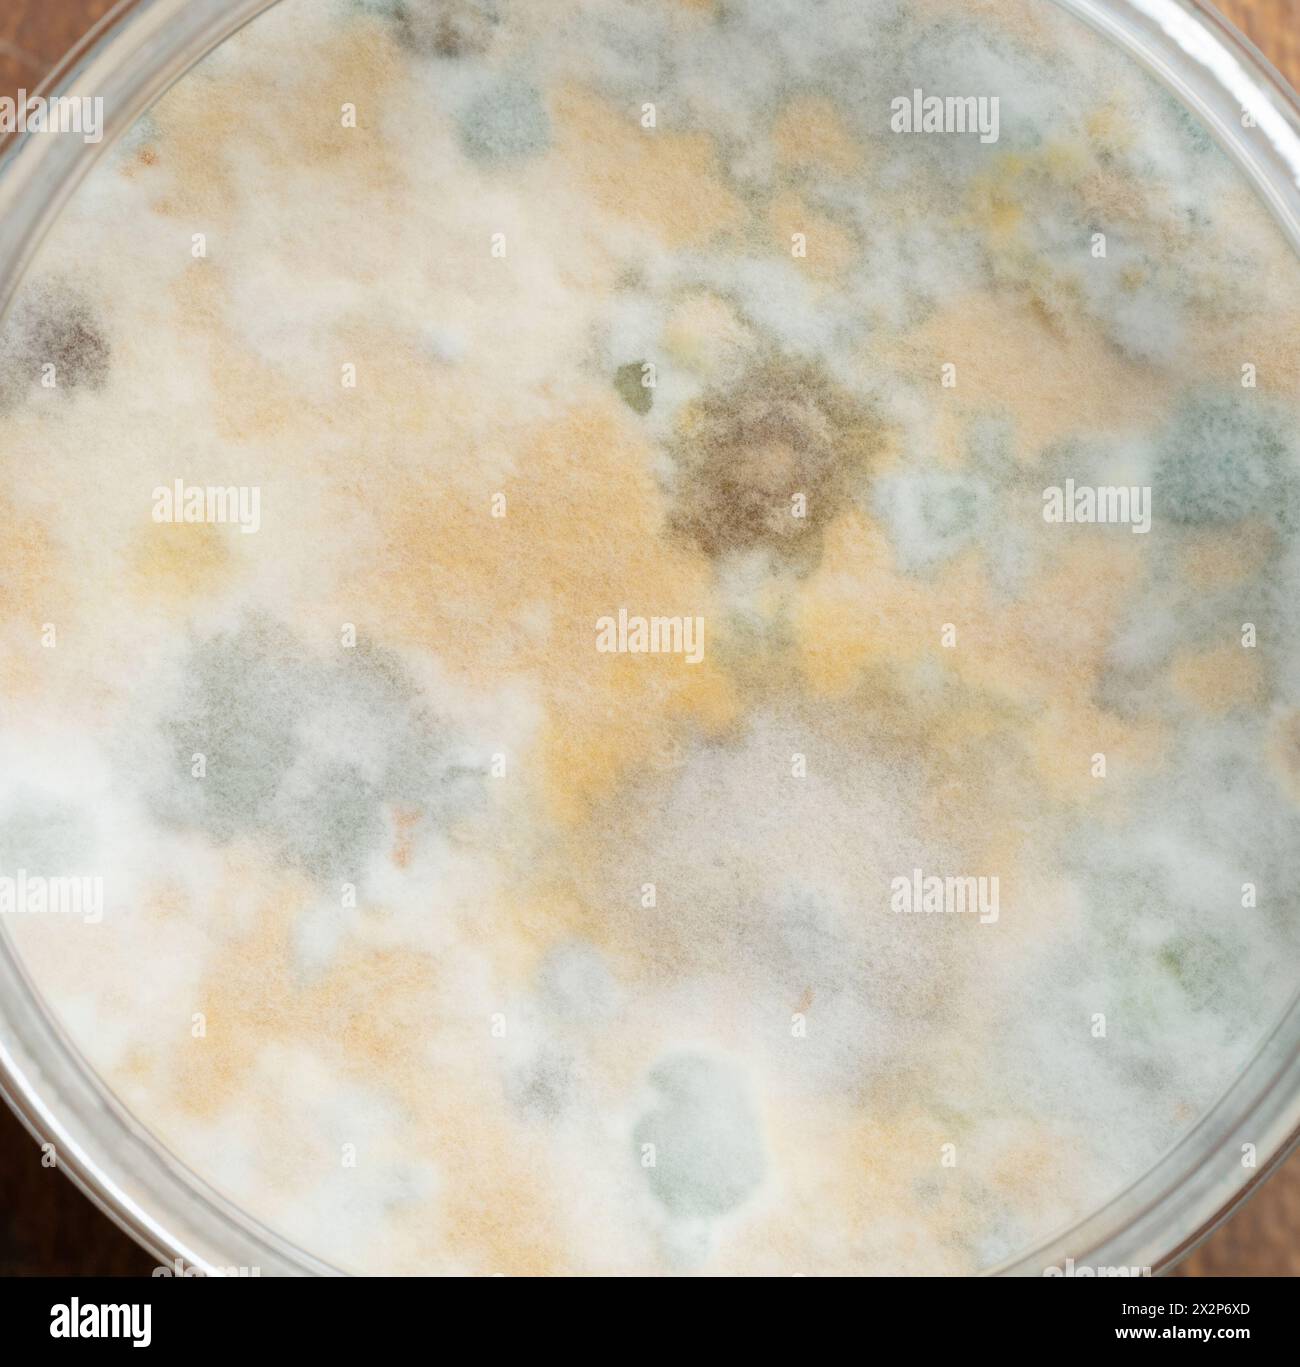 Unhealthy moldy surface close up view. Toxic poison fungus background Stock Photo